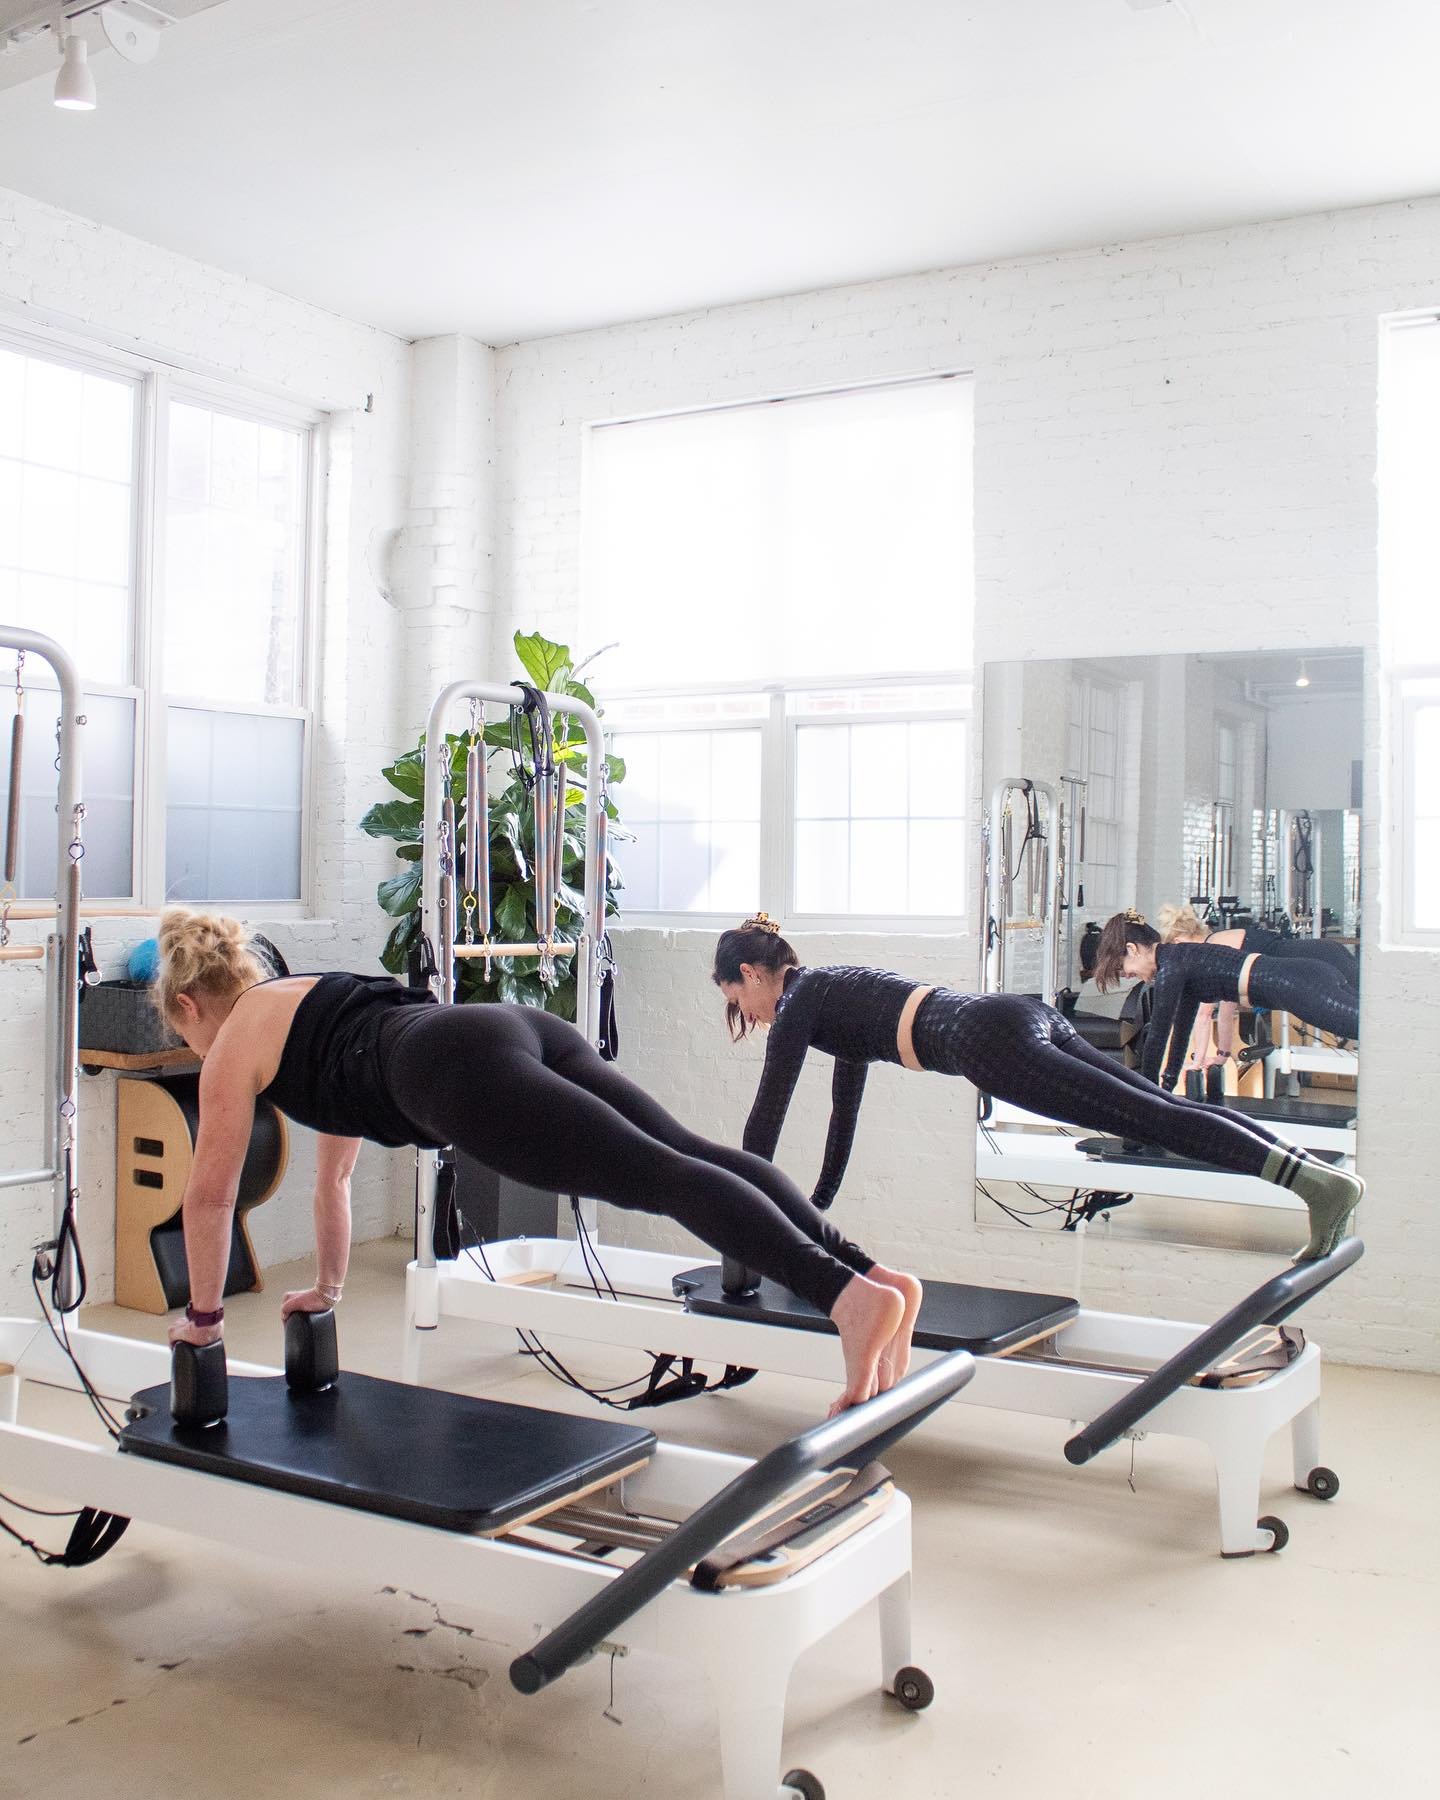 The functional movements of Pilates really works every muscle in the body and will get you thinking about how you&rsquo;re moving too.☁️🤸🏽&zwj;♂️ The best workout to prepare your mind and body for whatever the weekend brings! 

Don&rsquo;t forget t